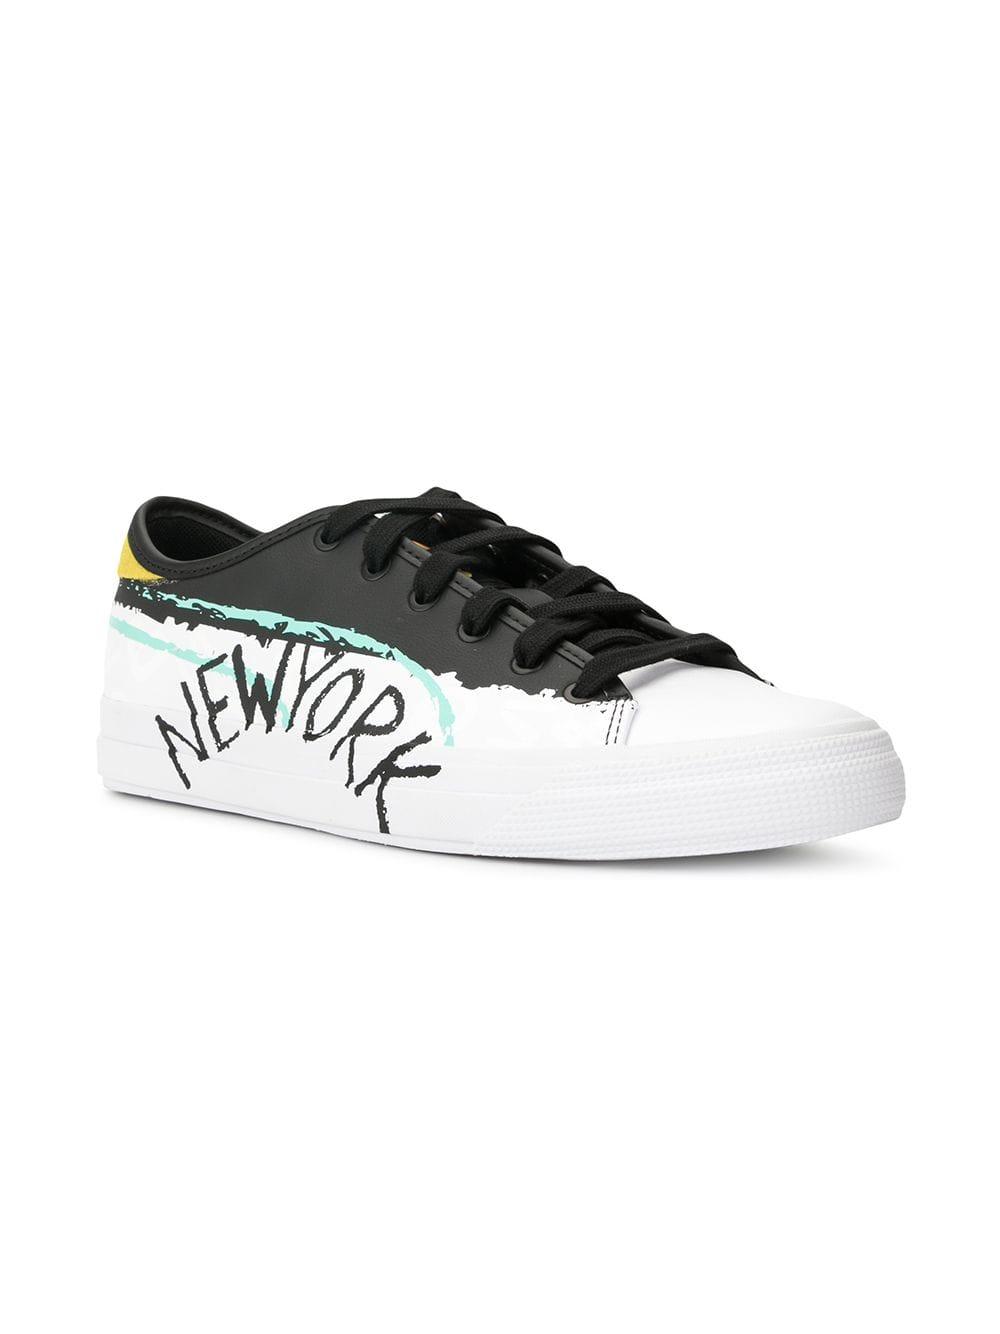 PUMA Leather New York Print Sneakers in Black - Lyst